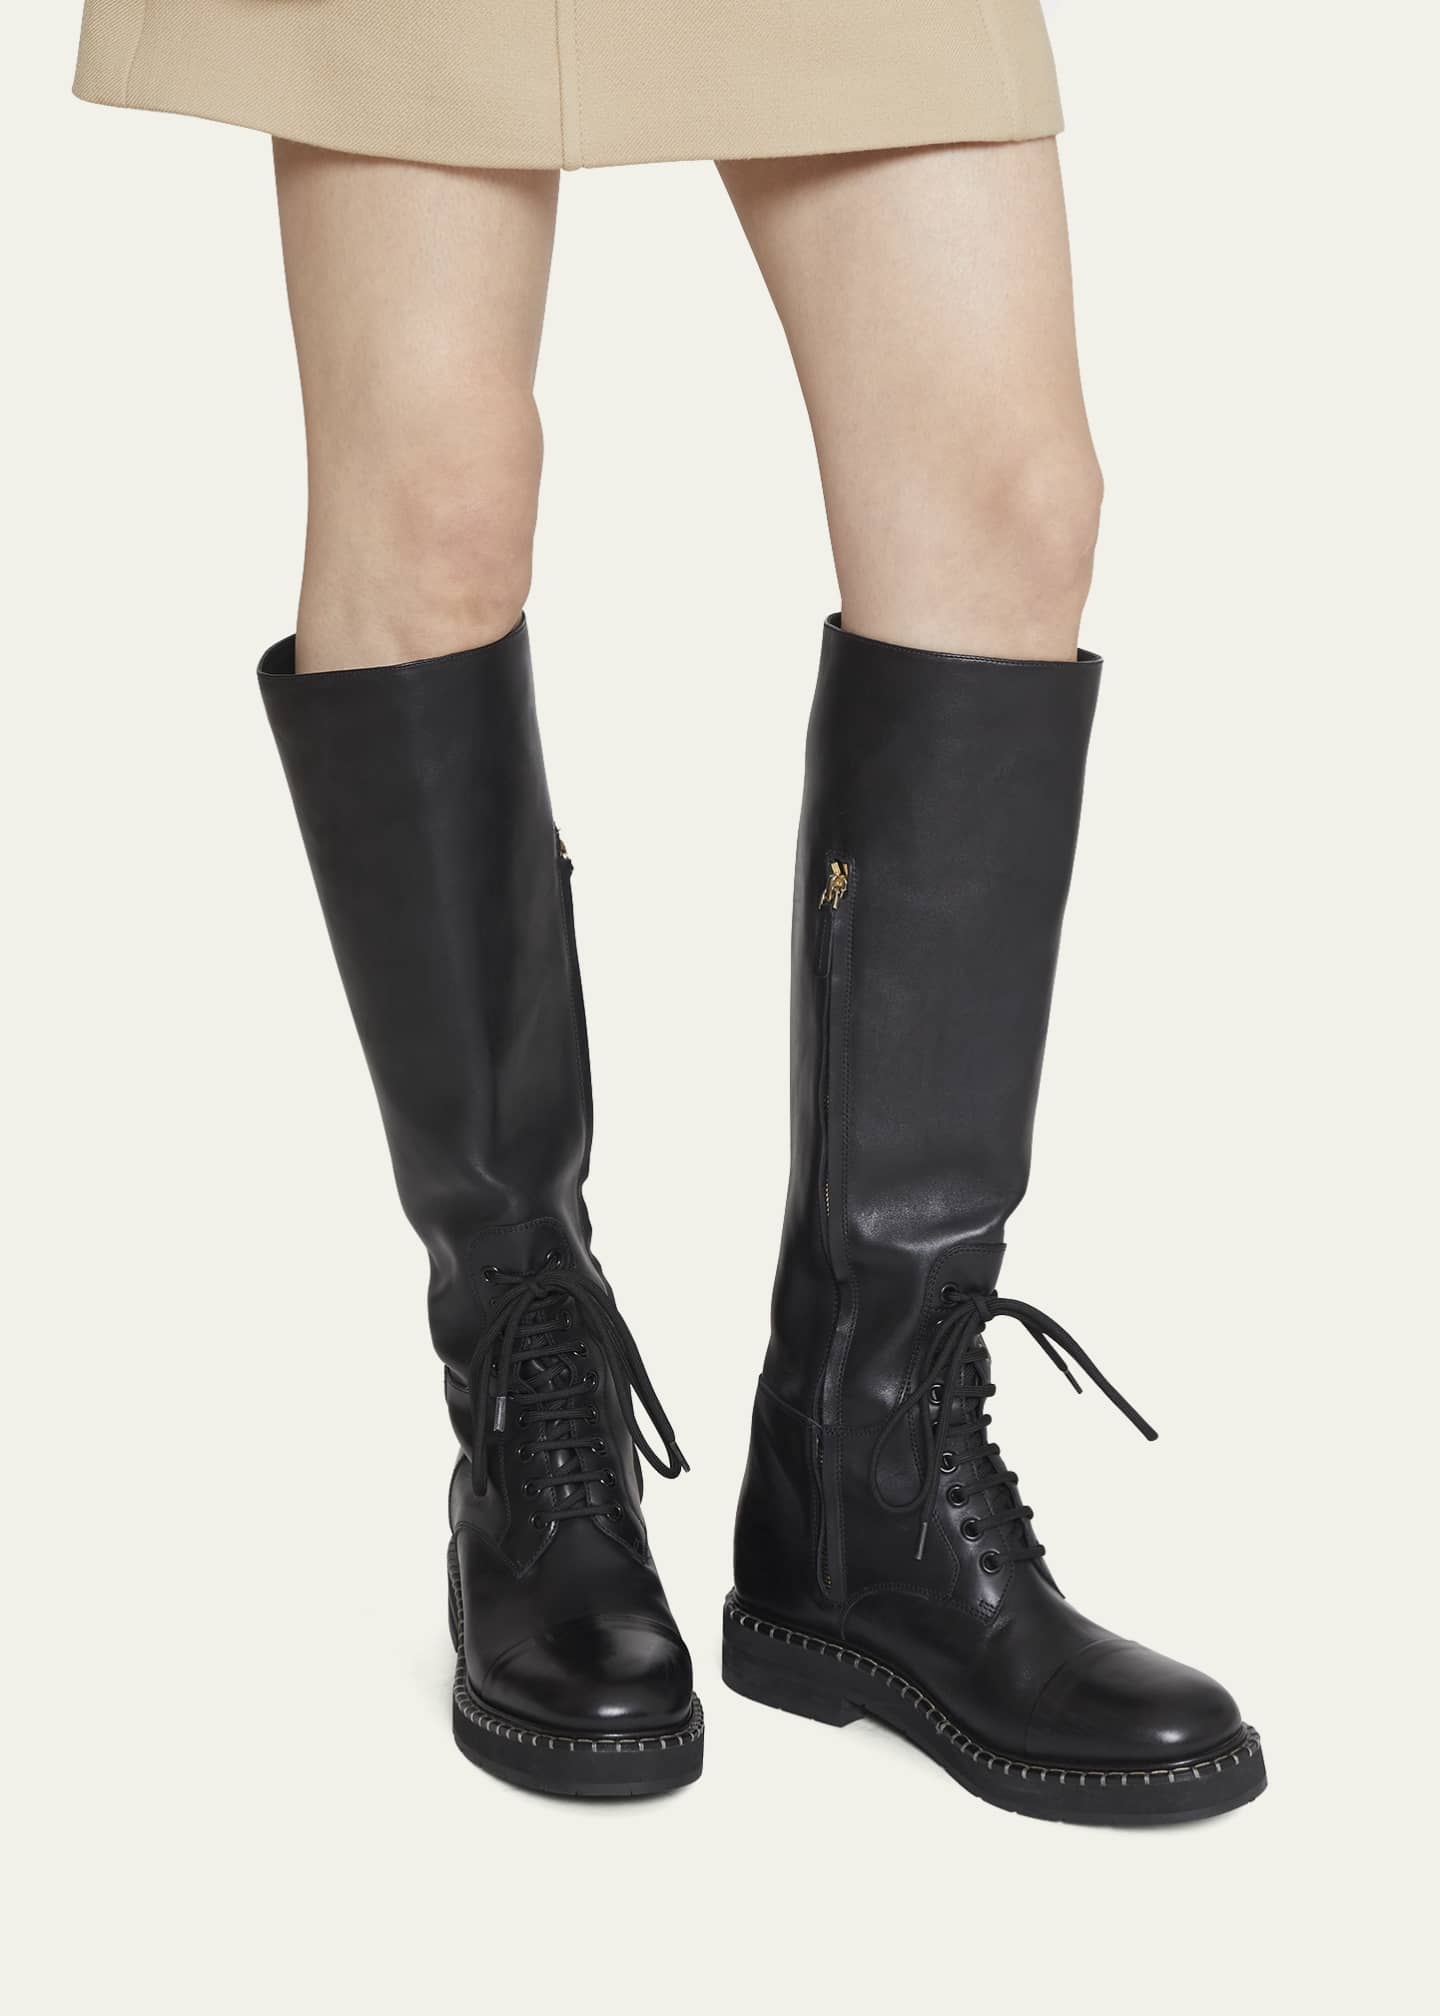 Chloe Noua Leather Lace-Up Tall Boots - Bergdorf Goodman